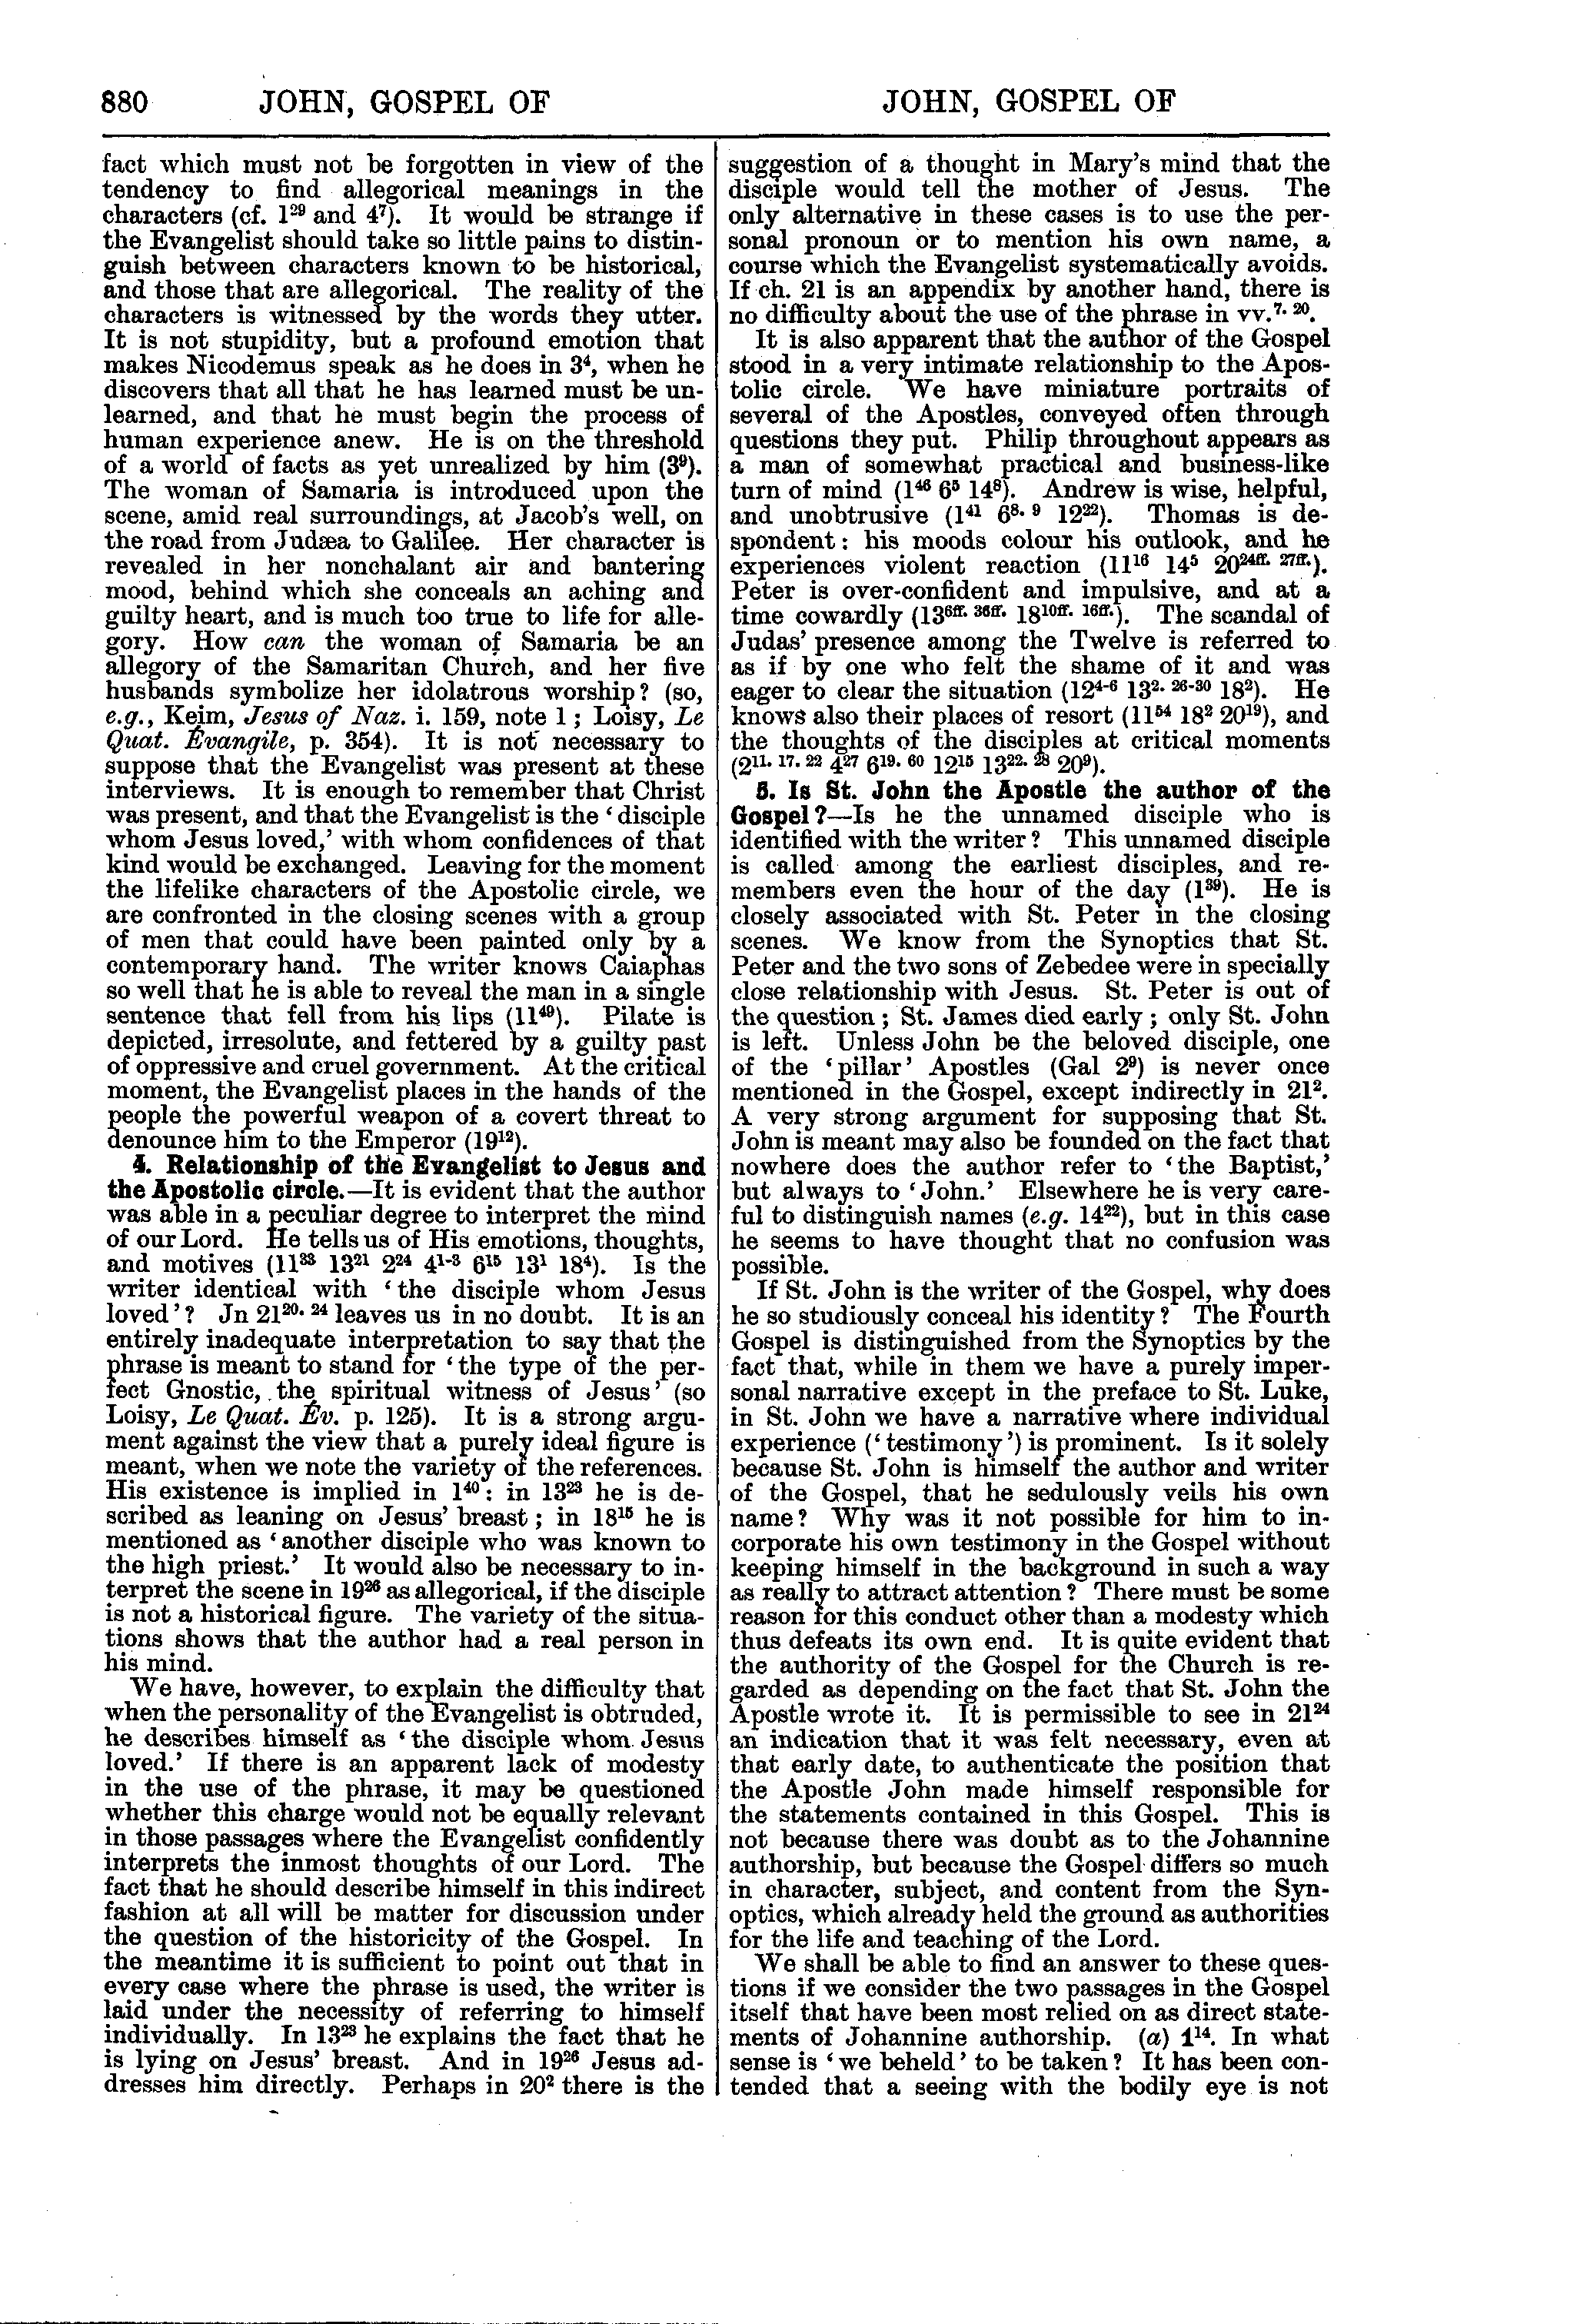 Image of page 880